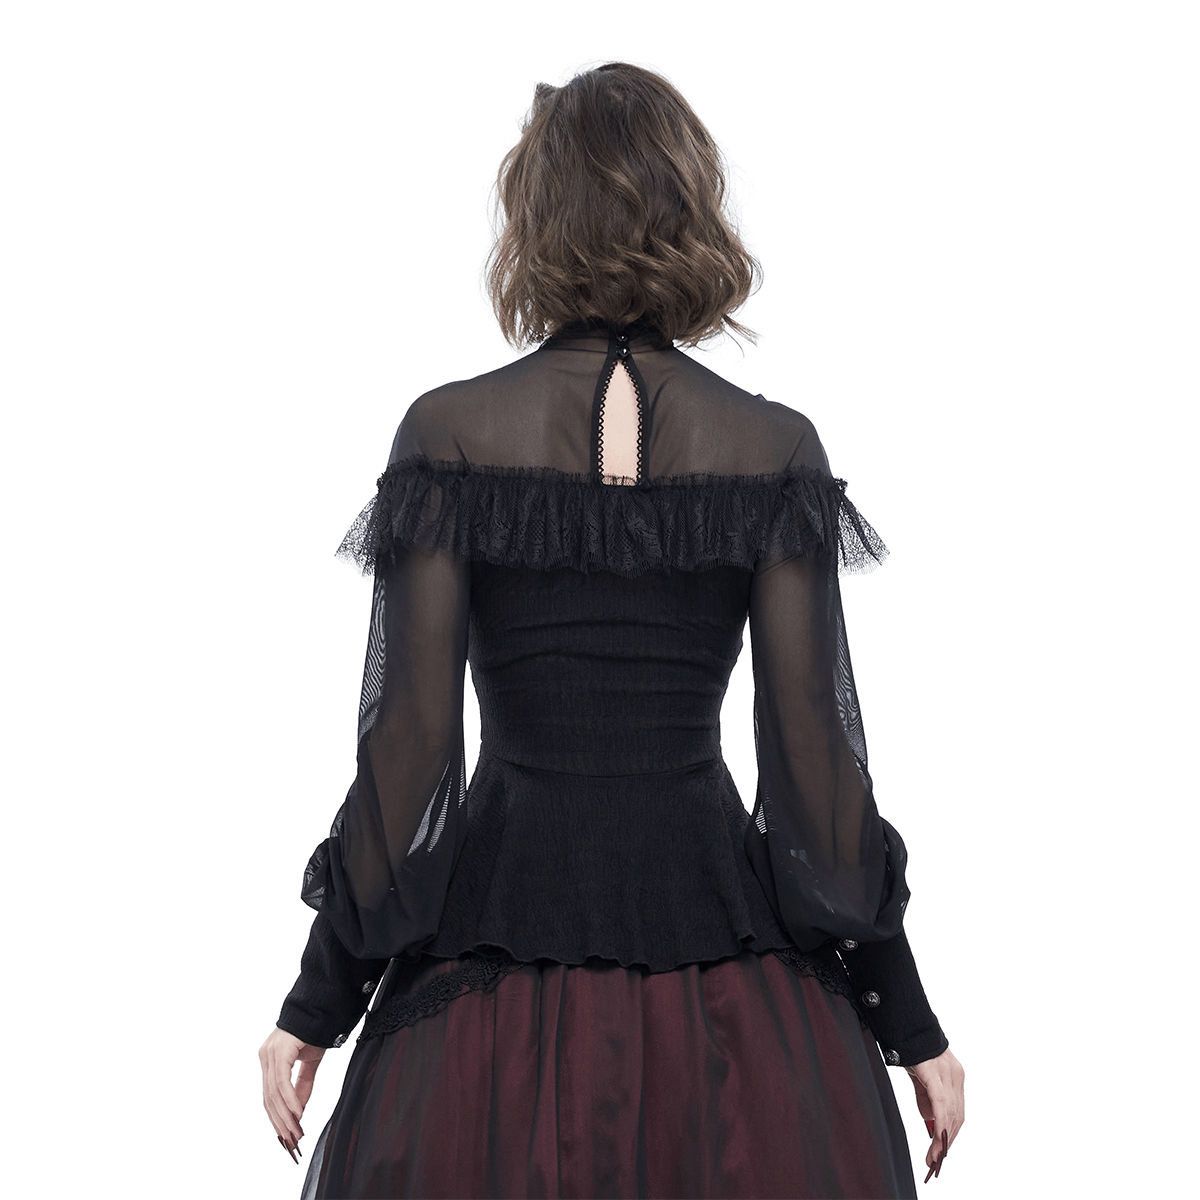 Lace Applique Beading Shirt for Women / Gothic Long Transparent Sleeve Blouse - HARD'N'HEAVY